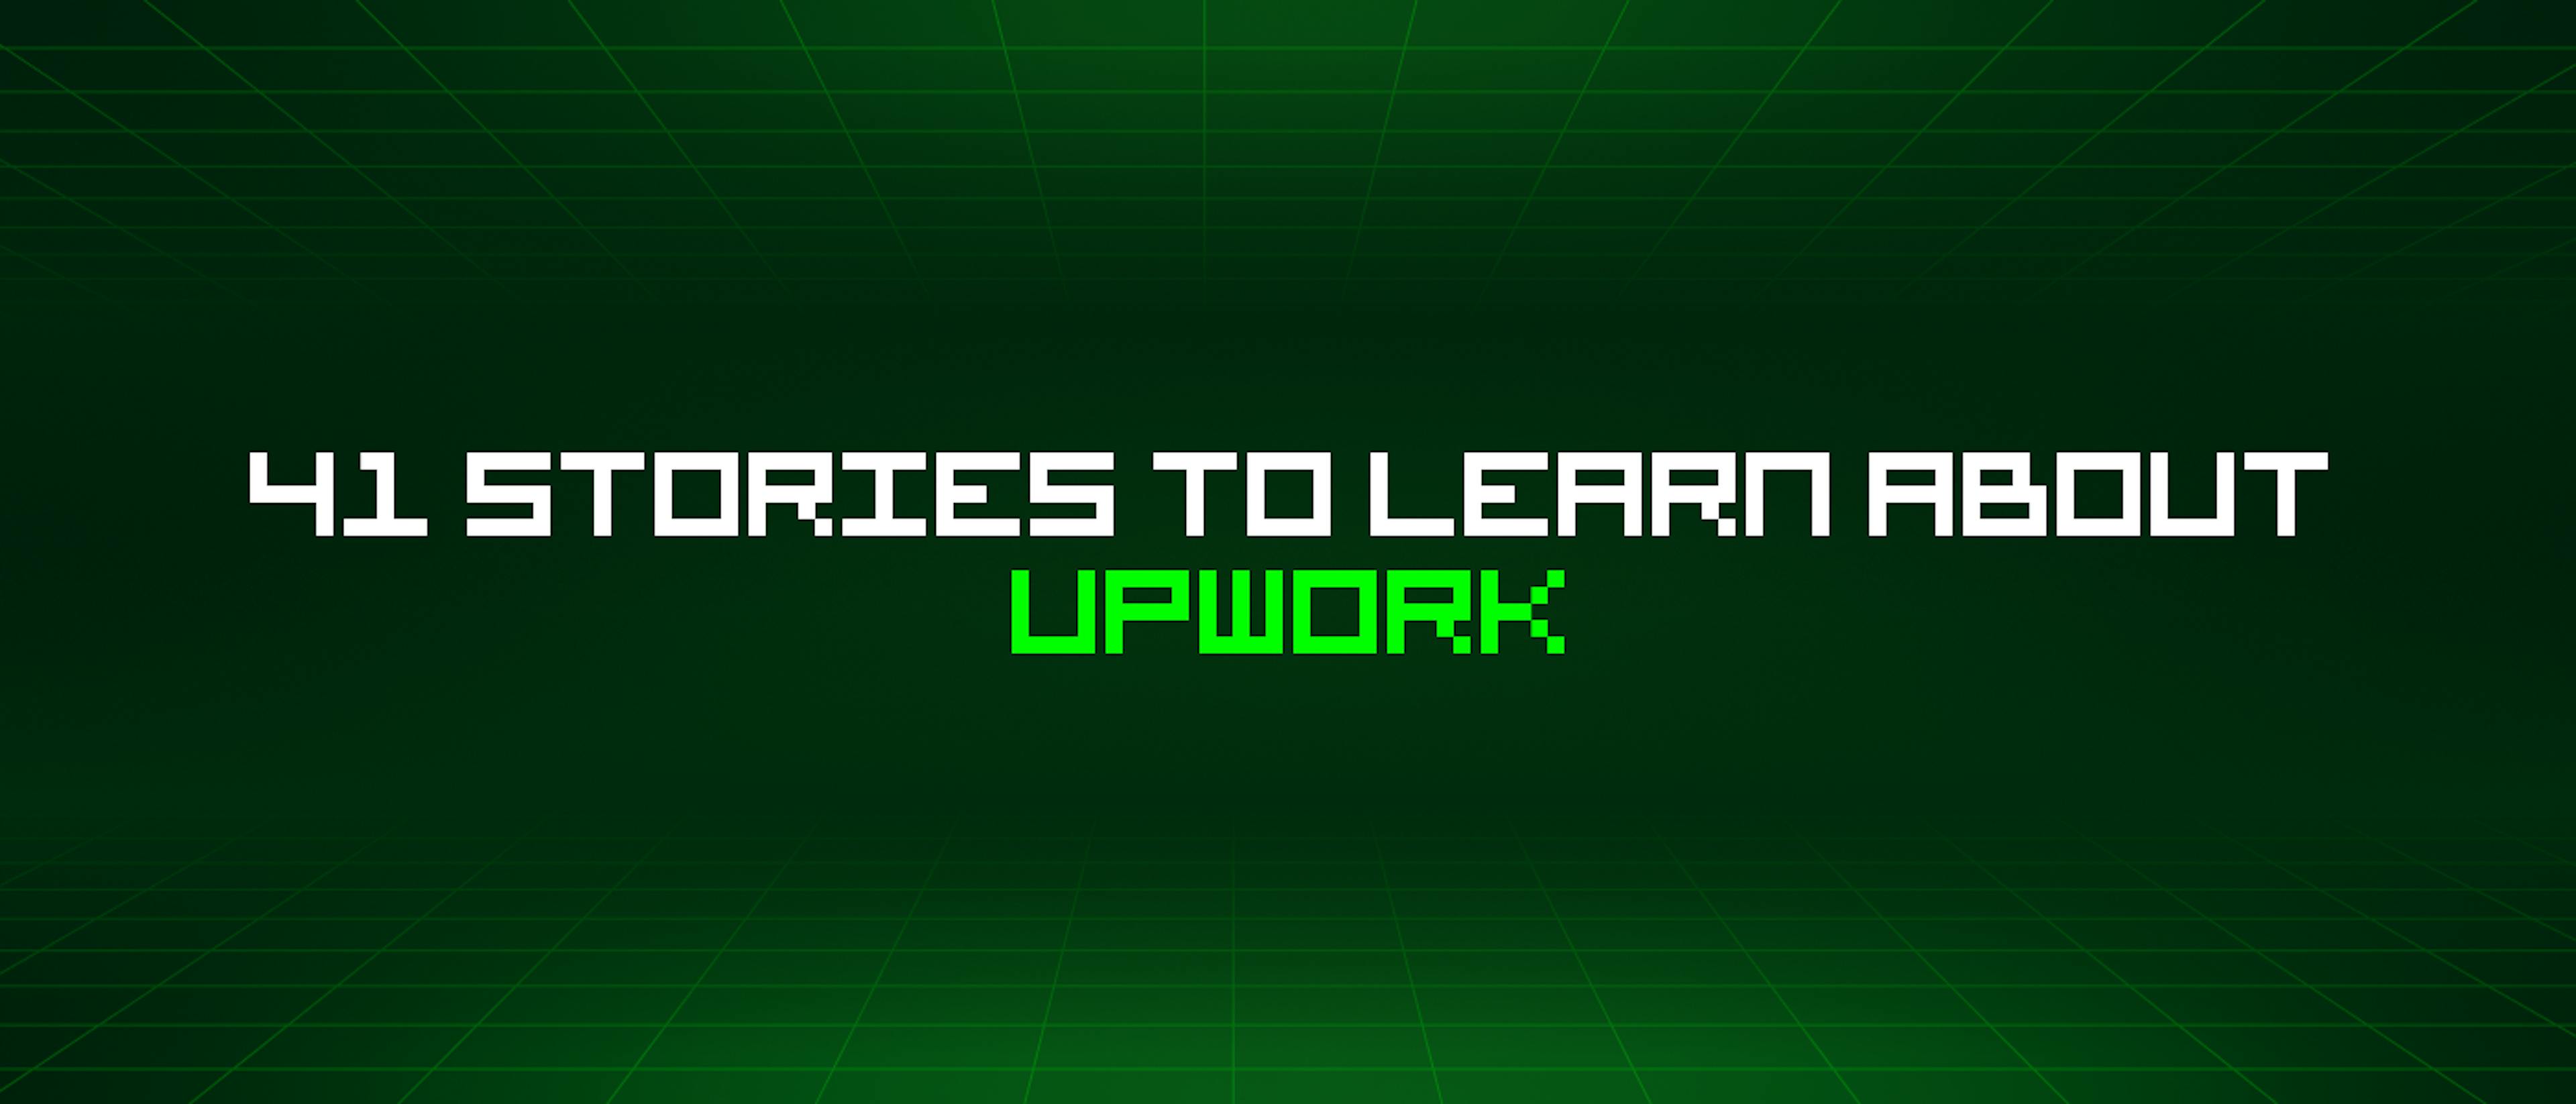 featured image - 41 Stories To Learn About Upwork